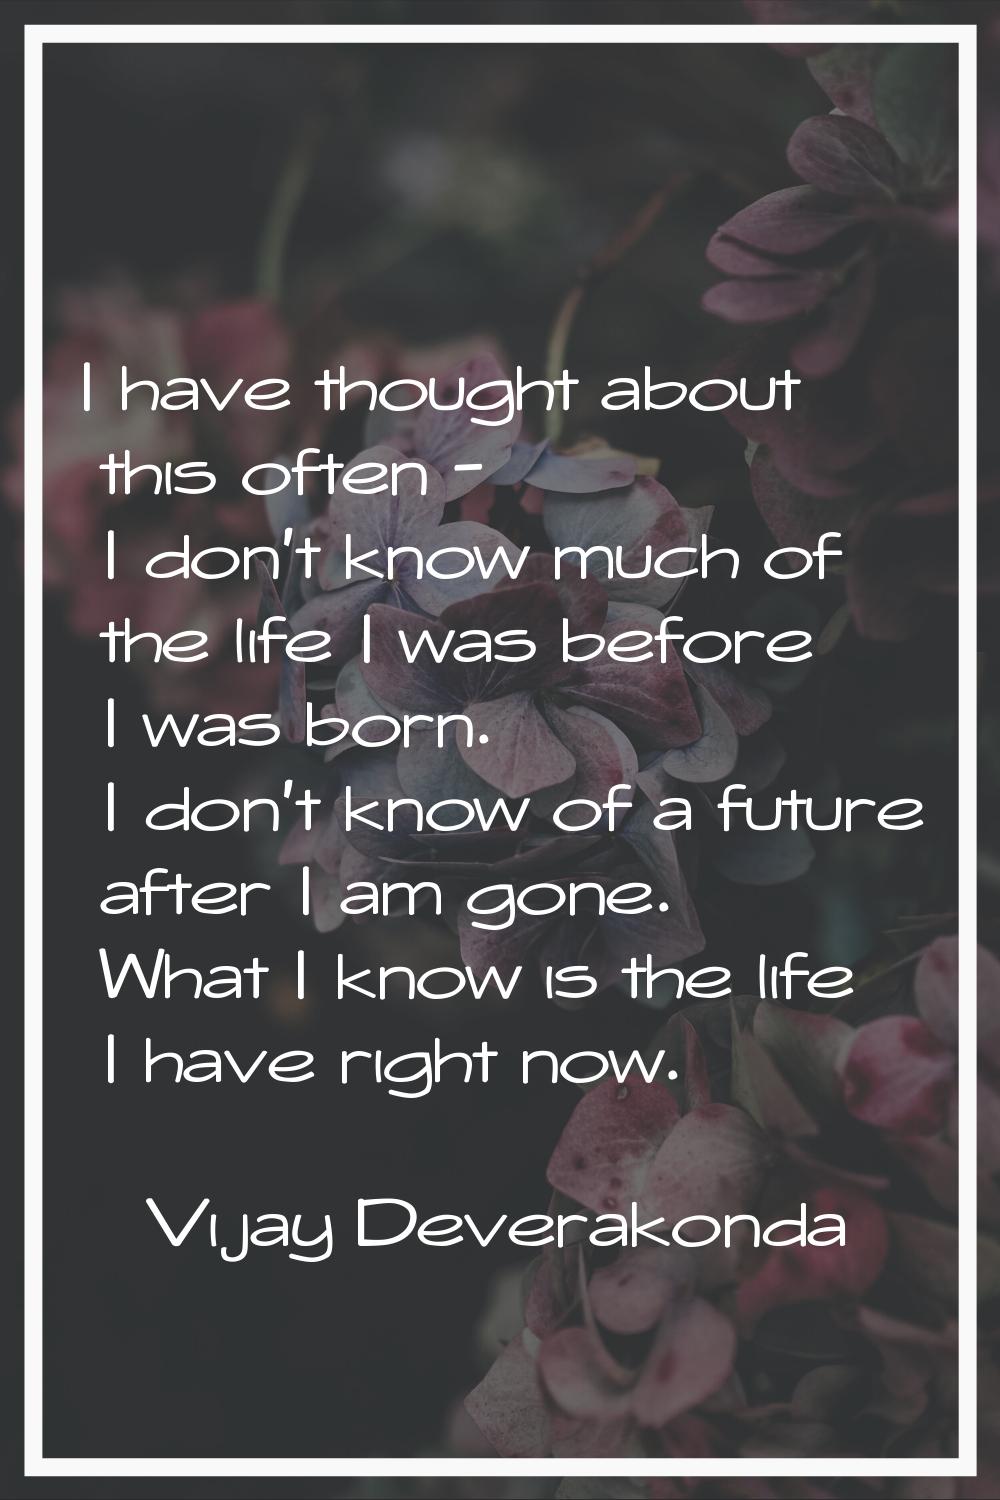 I have thought about this often - I don't know much of the life I was before I was born. I don't kn